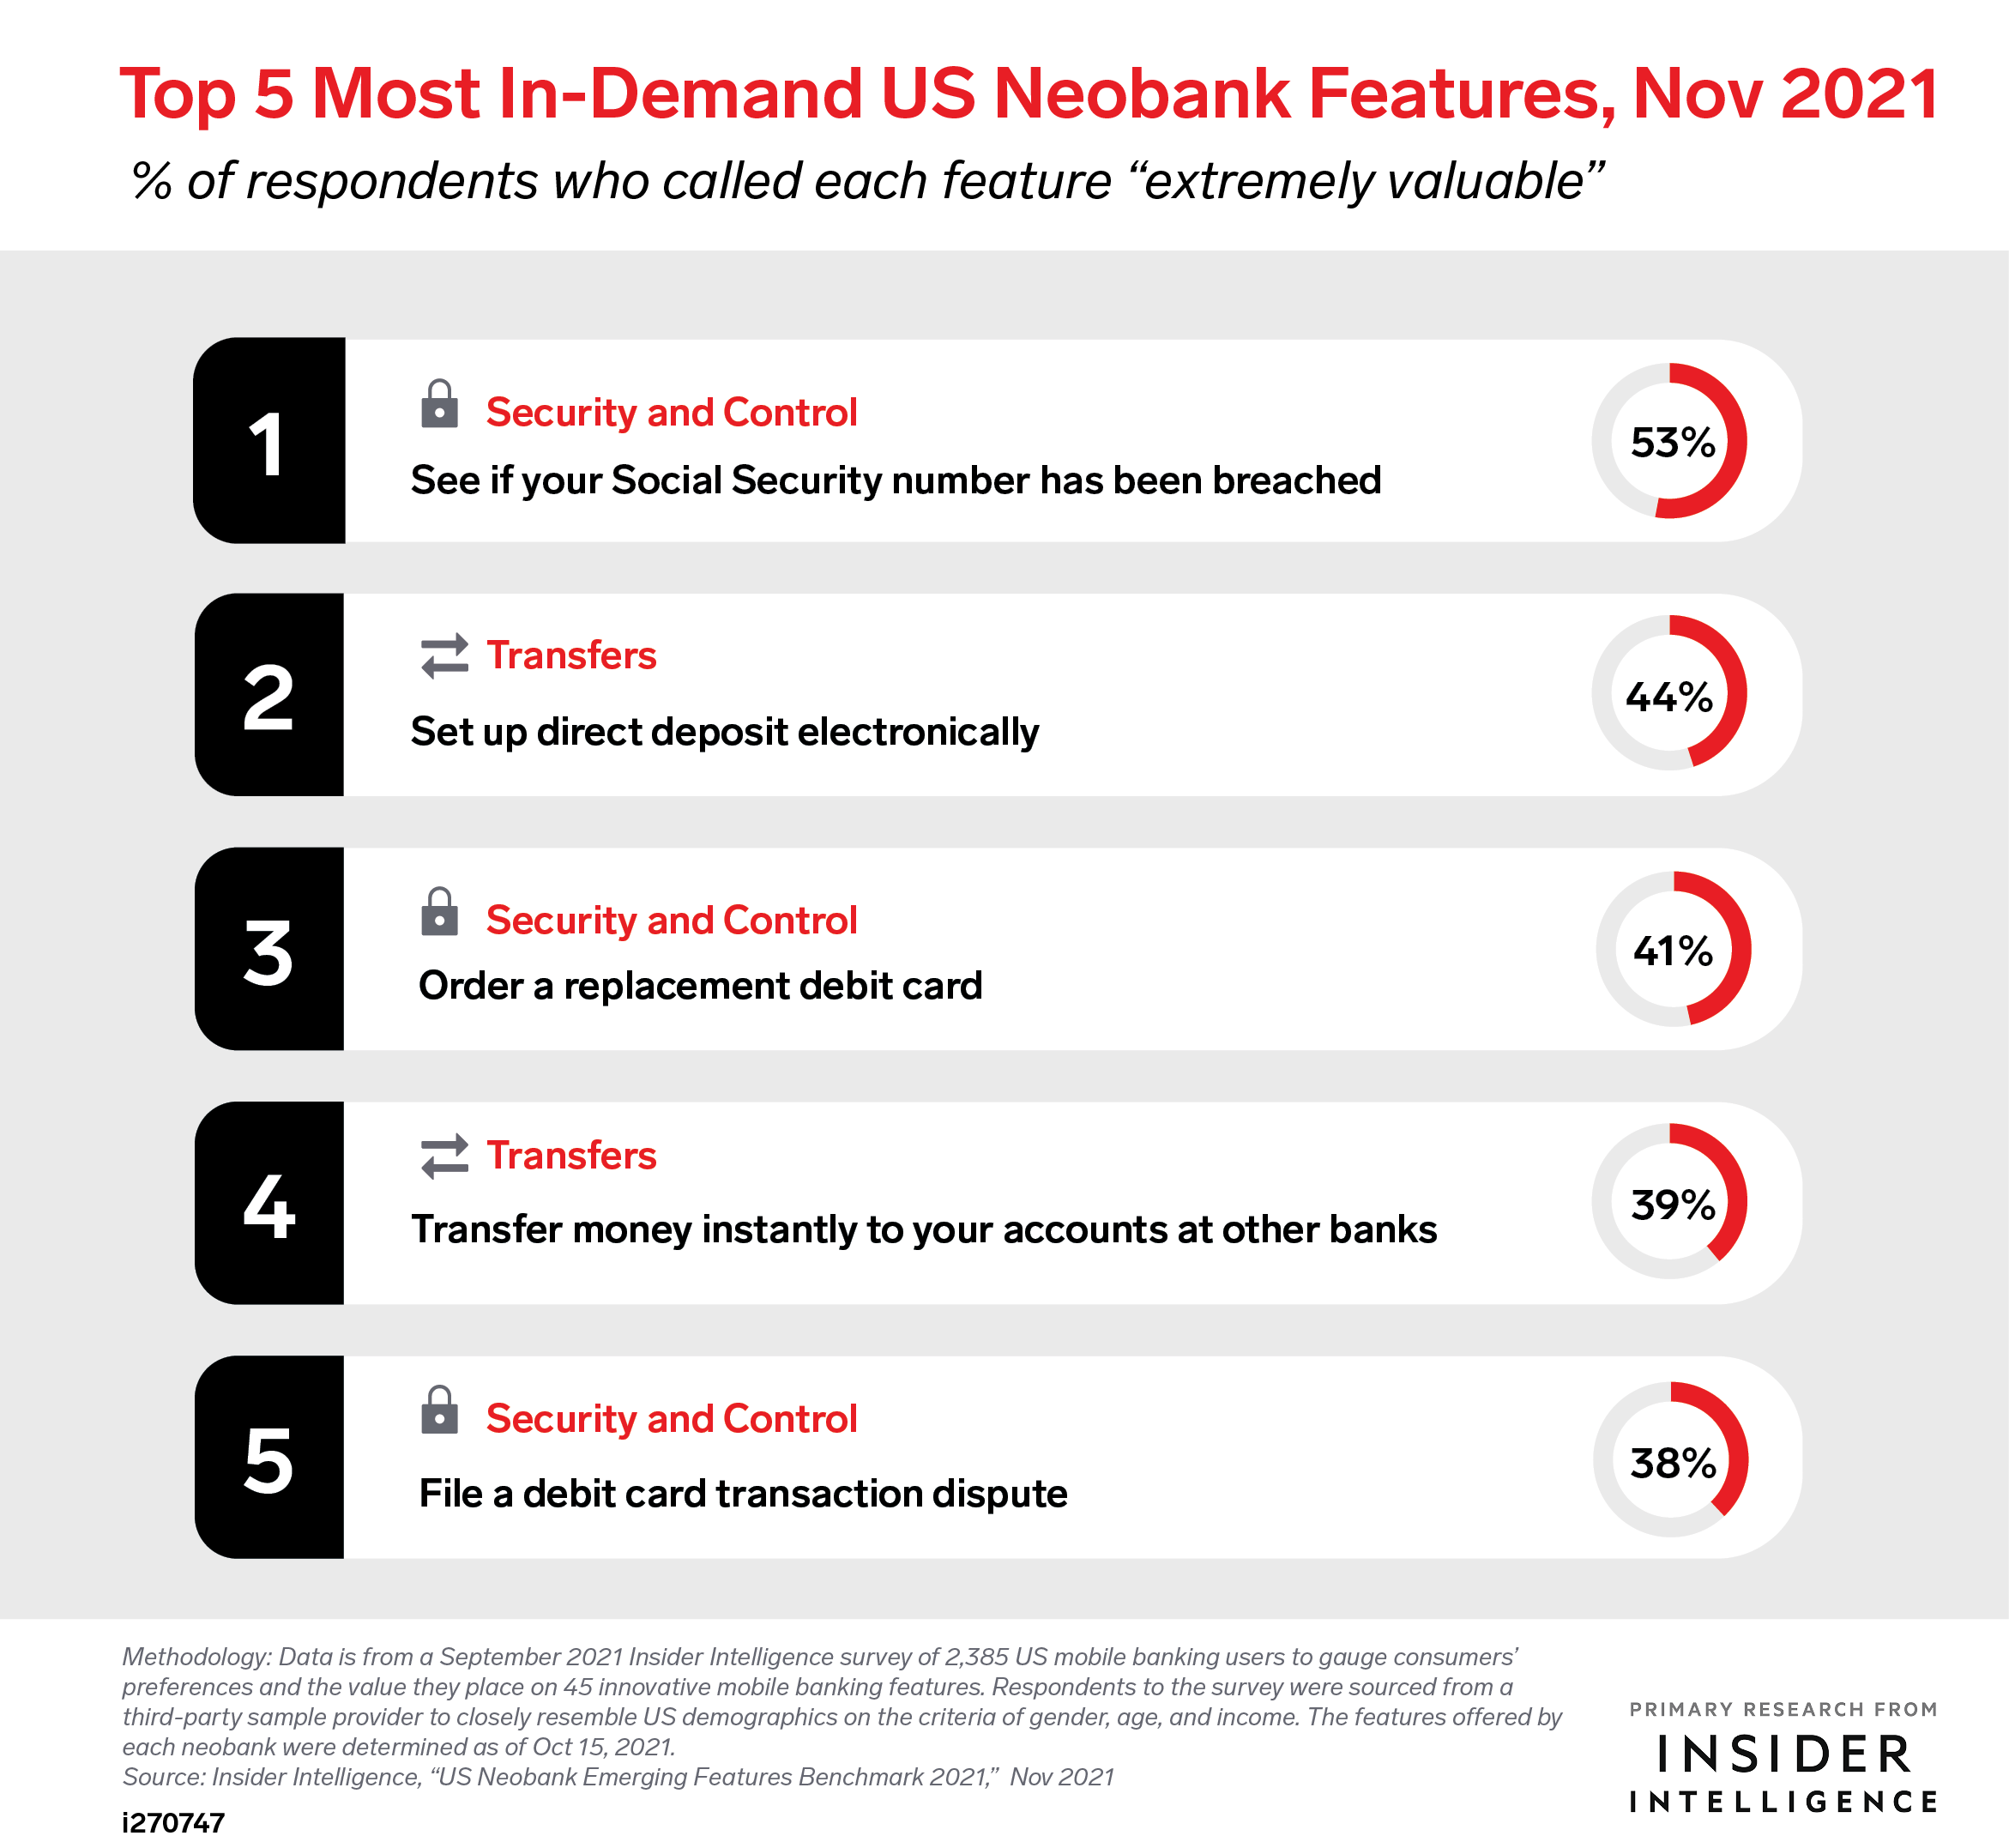 Top 5 Most In-Demand US Neobank Features, Sep 2021 (% of respondents who rate feature 